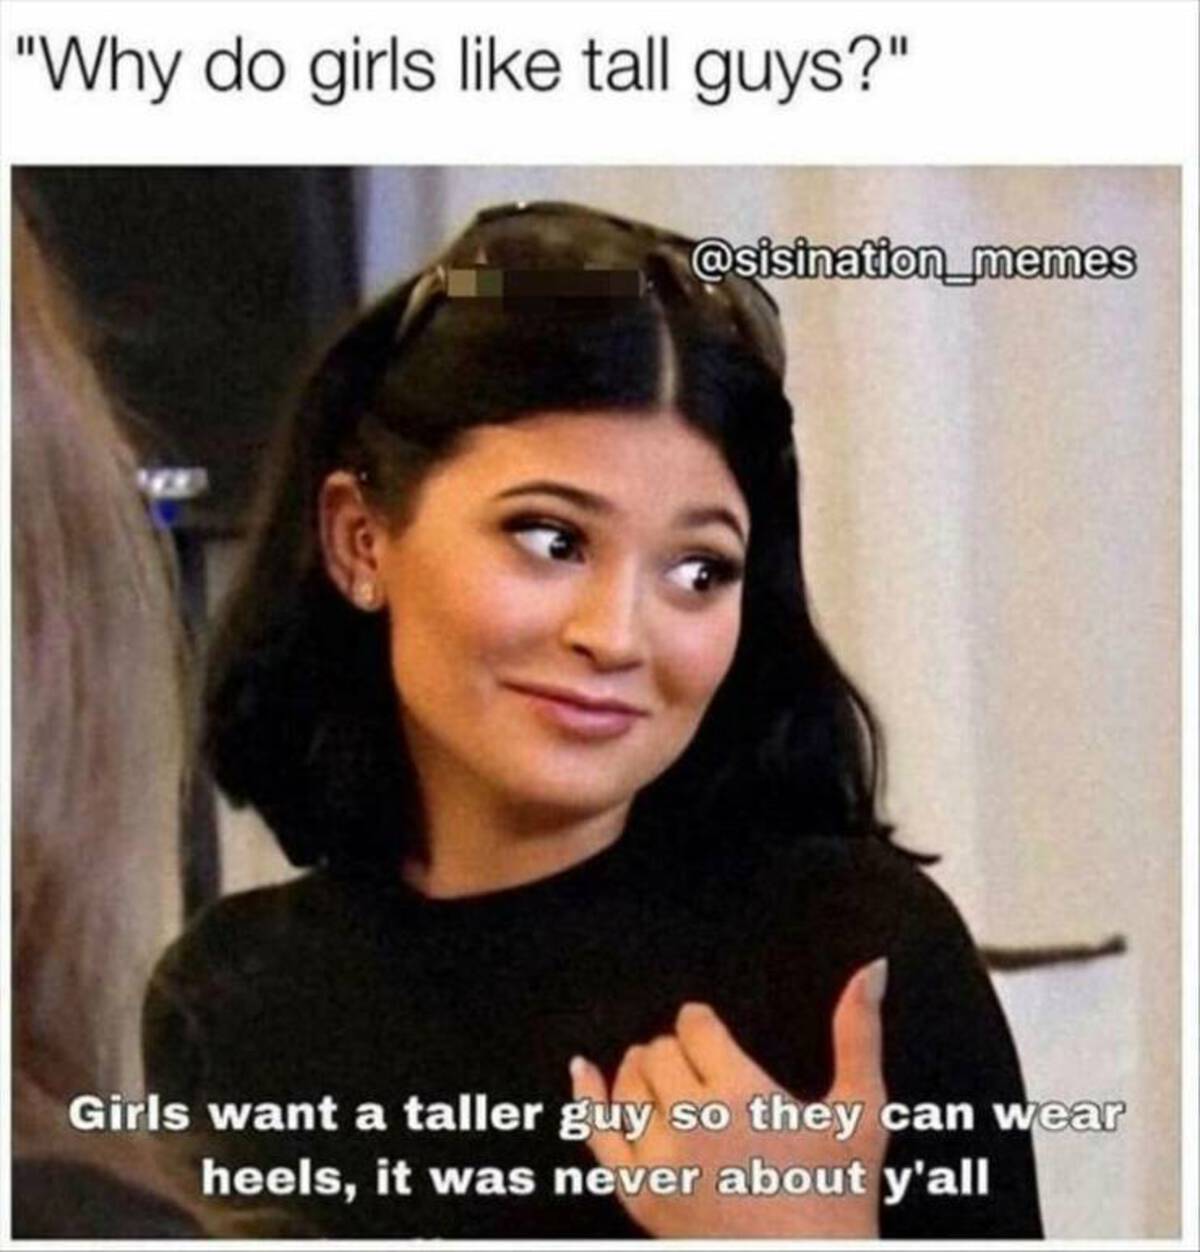 epic funny memes - "Why do girls tall guys?" memes Girls want a taller guy so they can wear heels, it was never about y'all